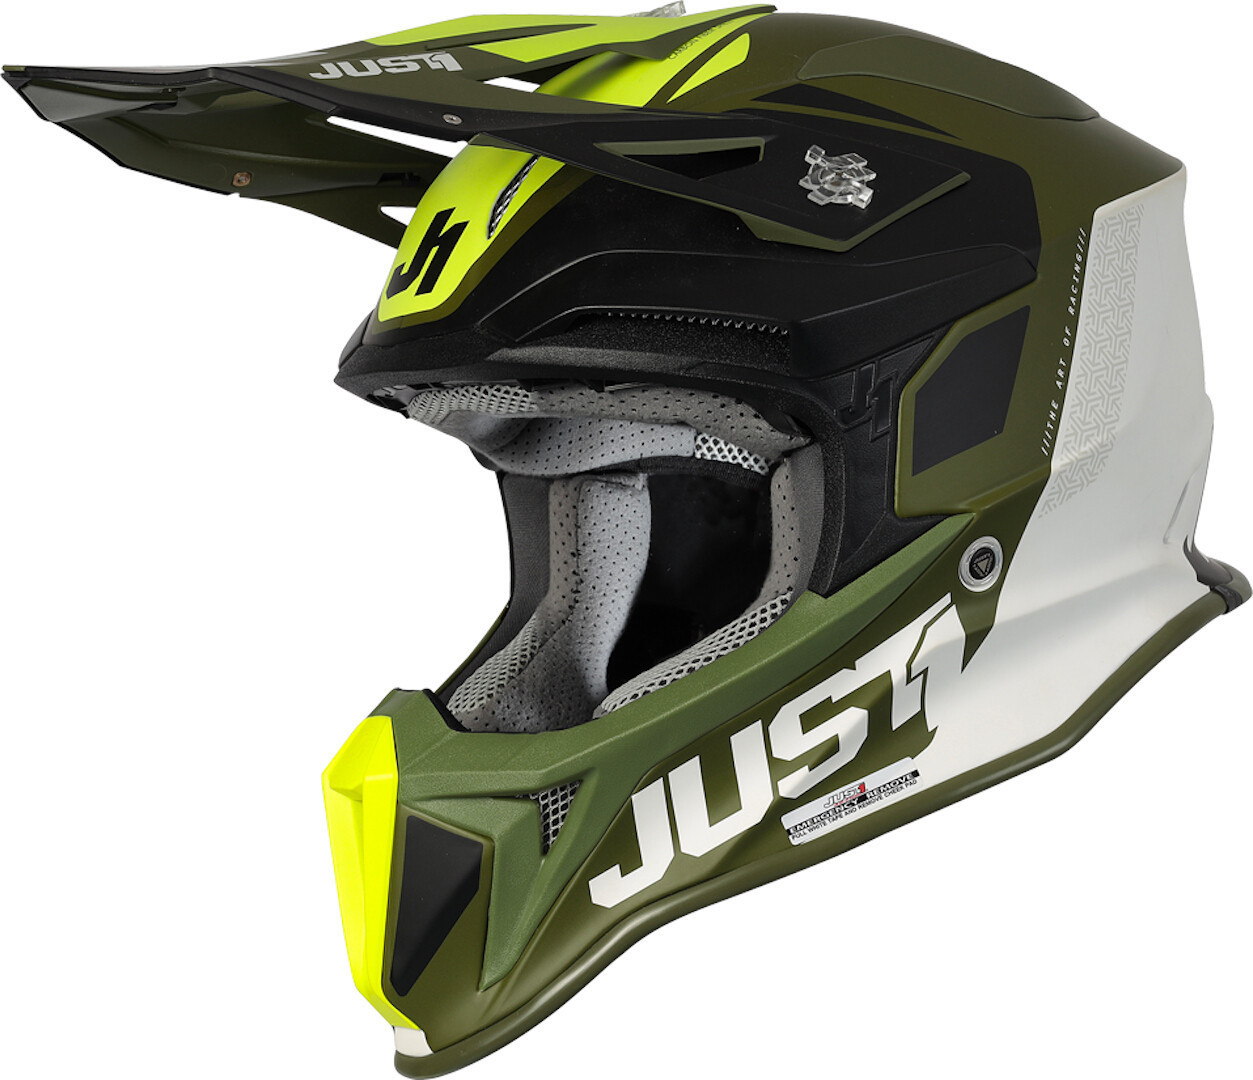 Image of Just1 J18 Pulsar Army Limited Edition Casco motocross, nero-bianco-verde, dimensione L